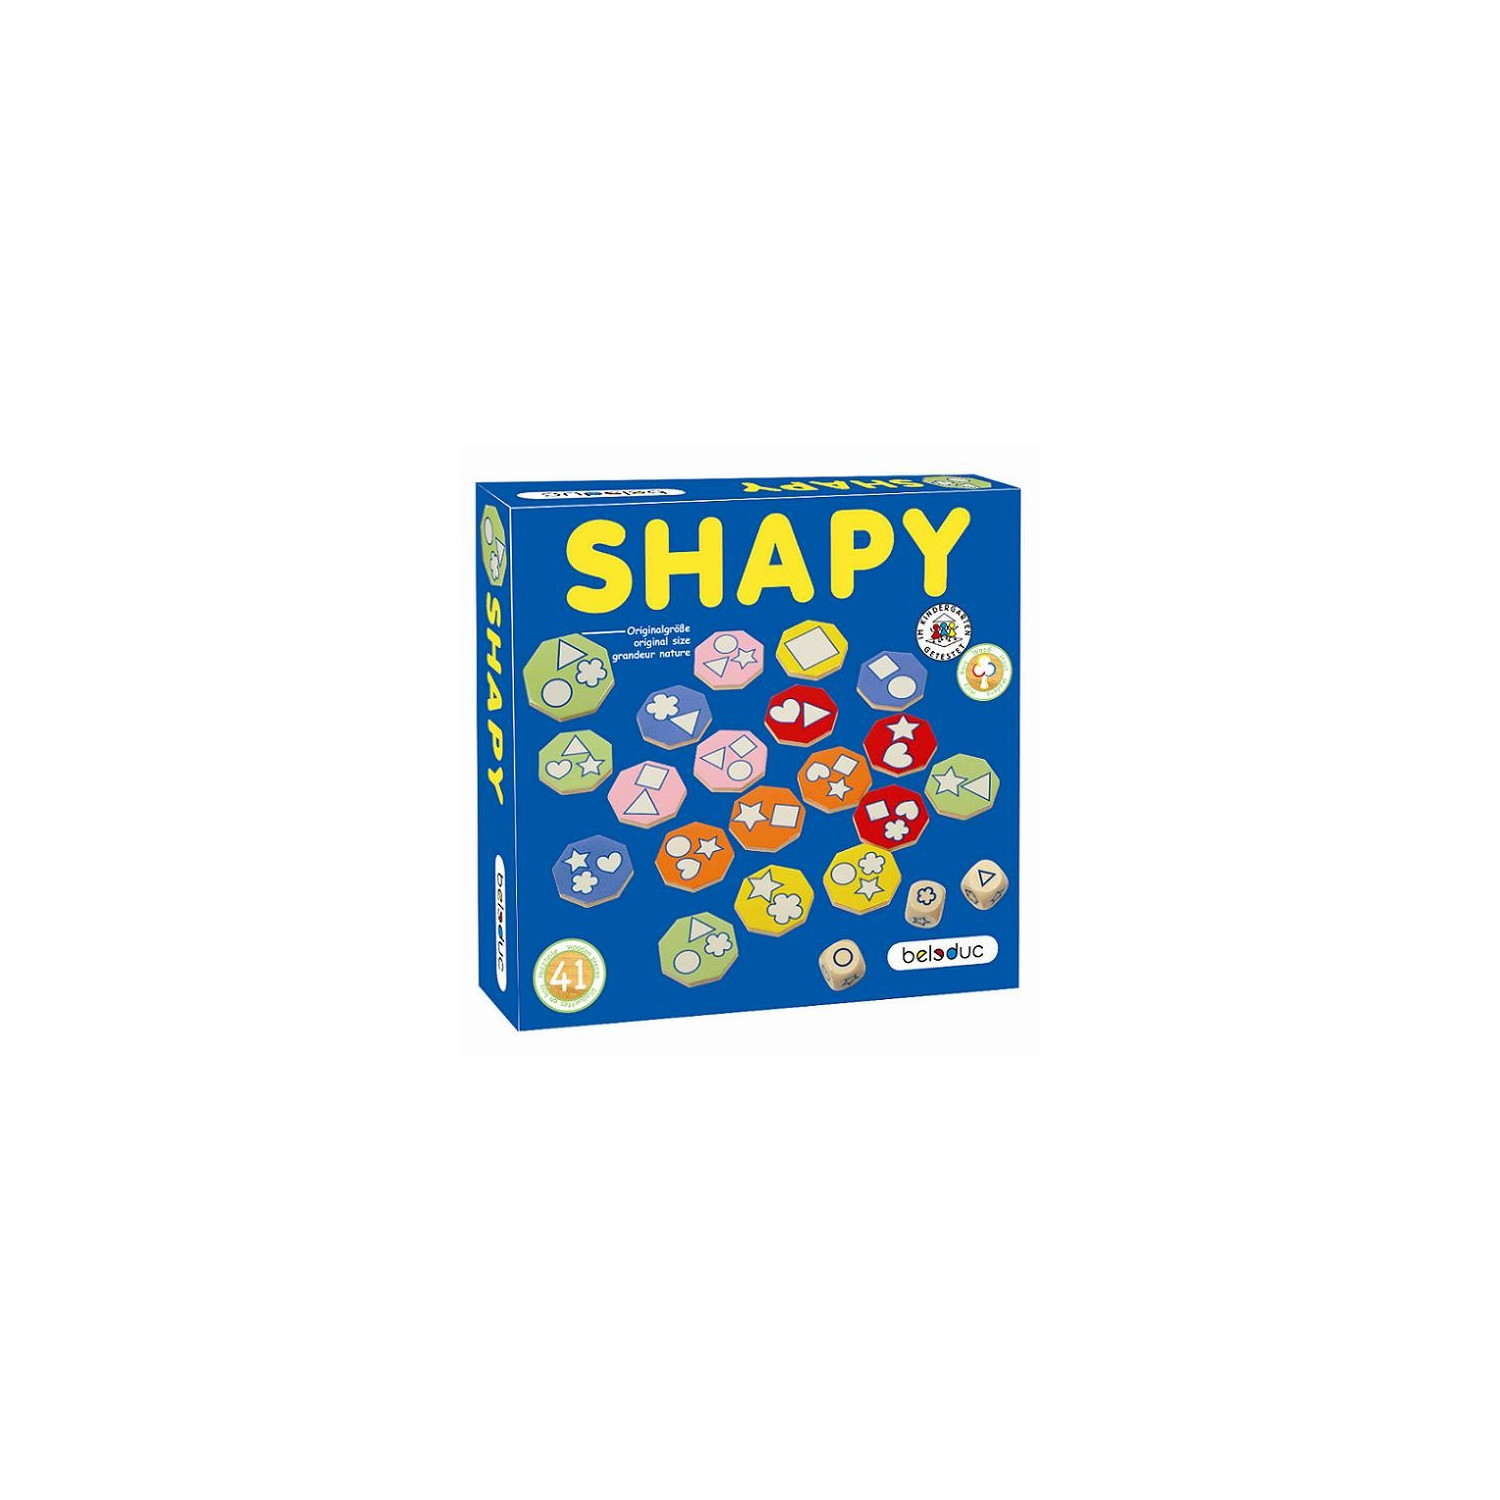 Shapy